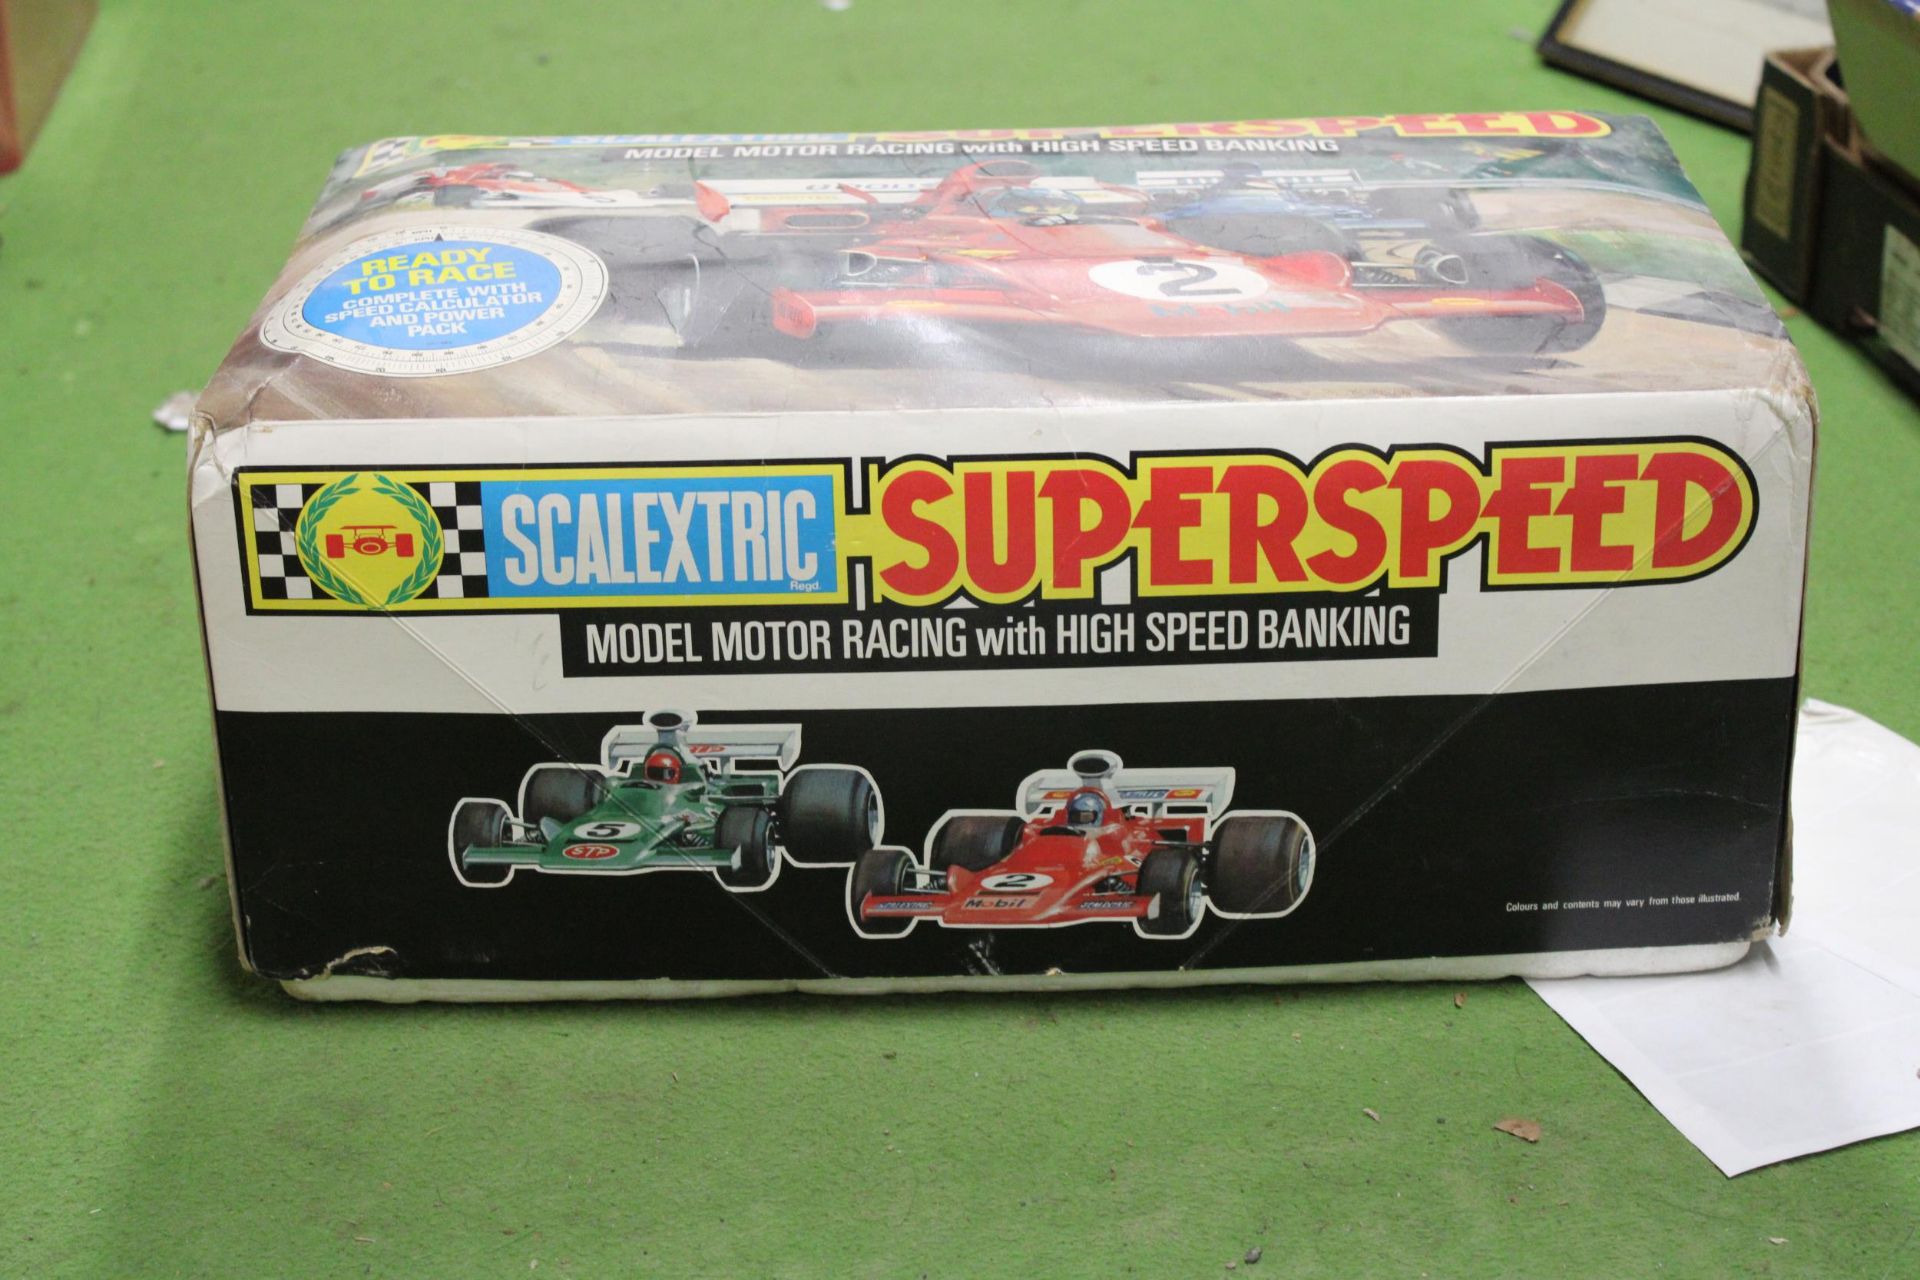 A BOXED SCALEXTRIC SUPERSPEED MODEL MOTOR RACING SET - Image 4 of 5